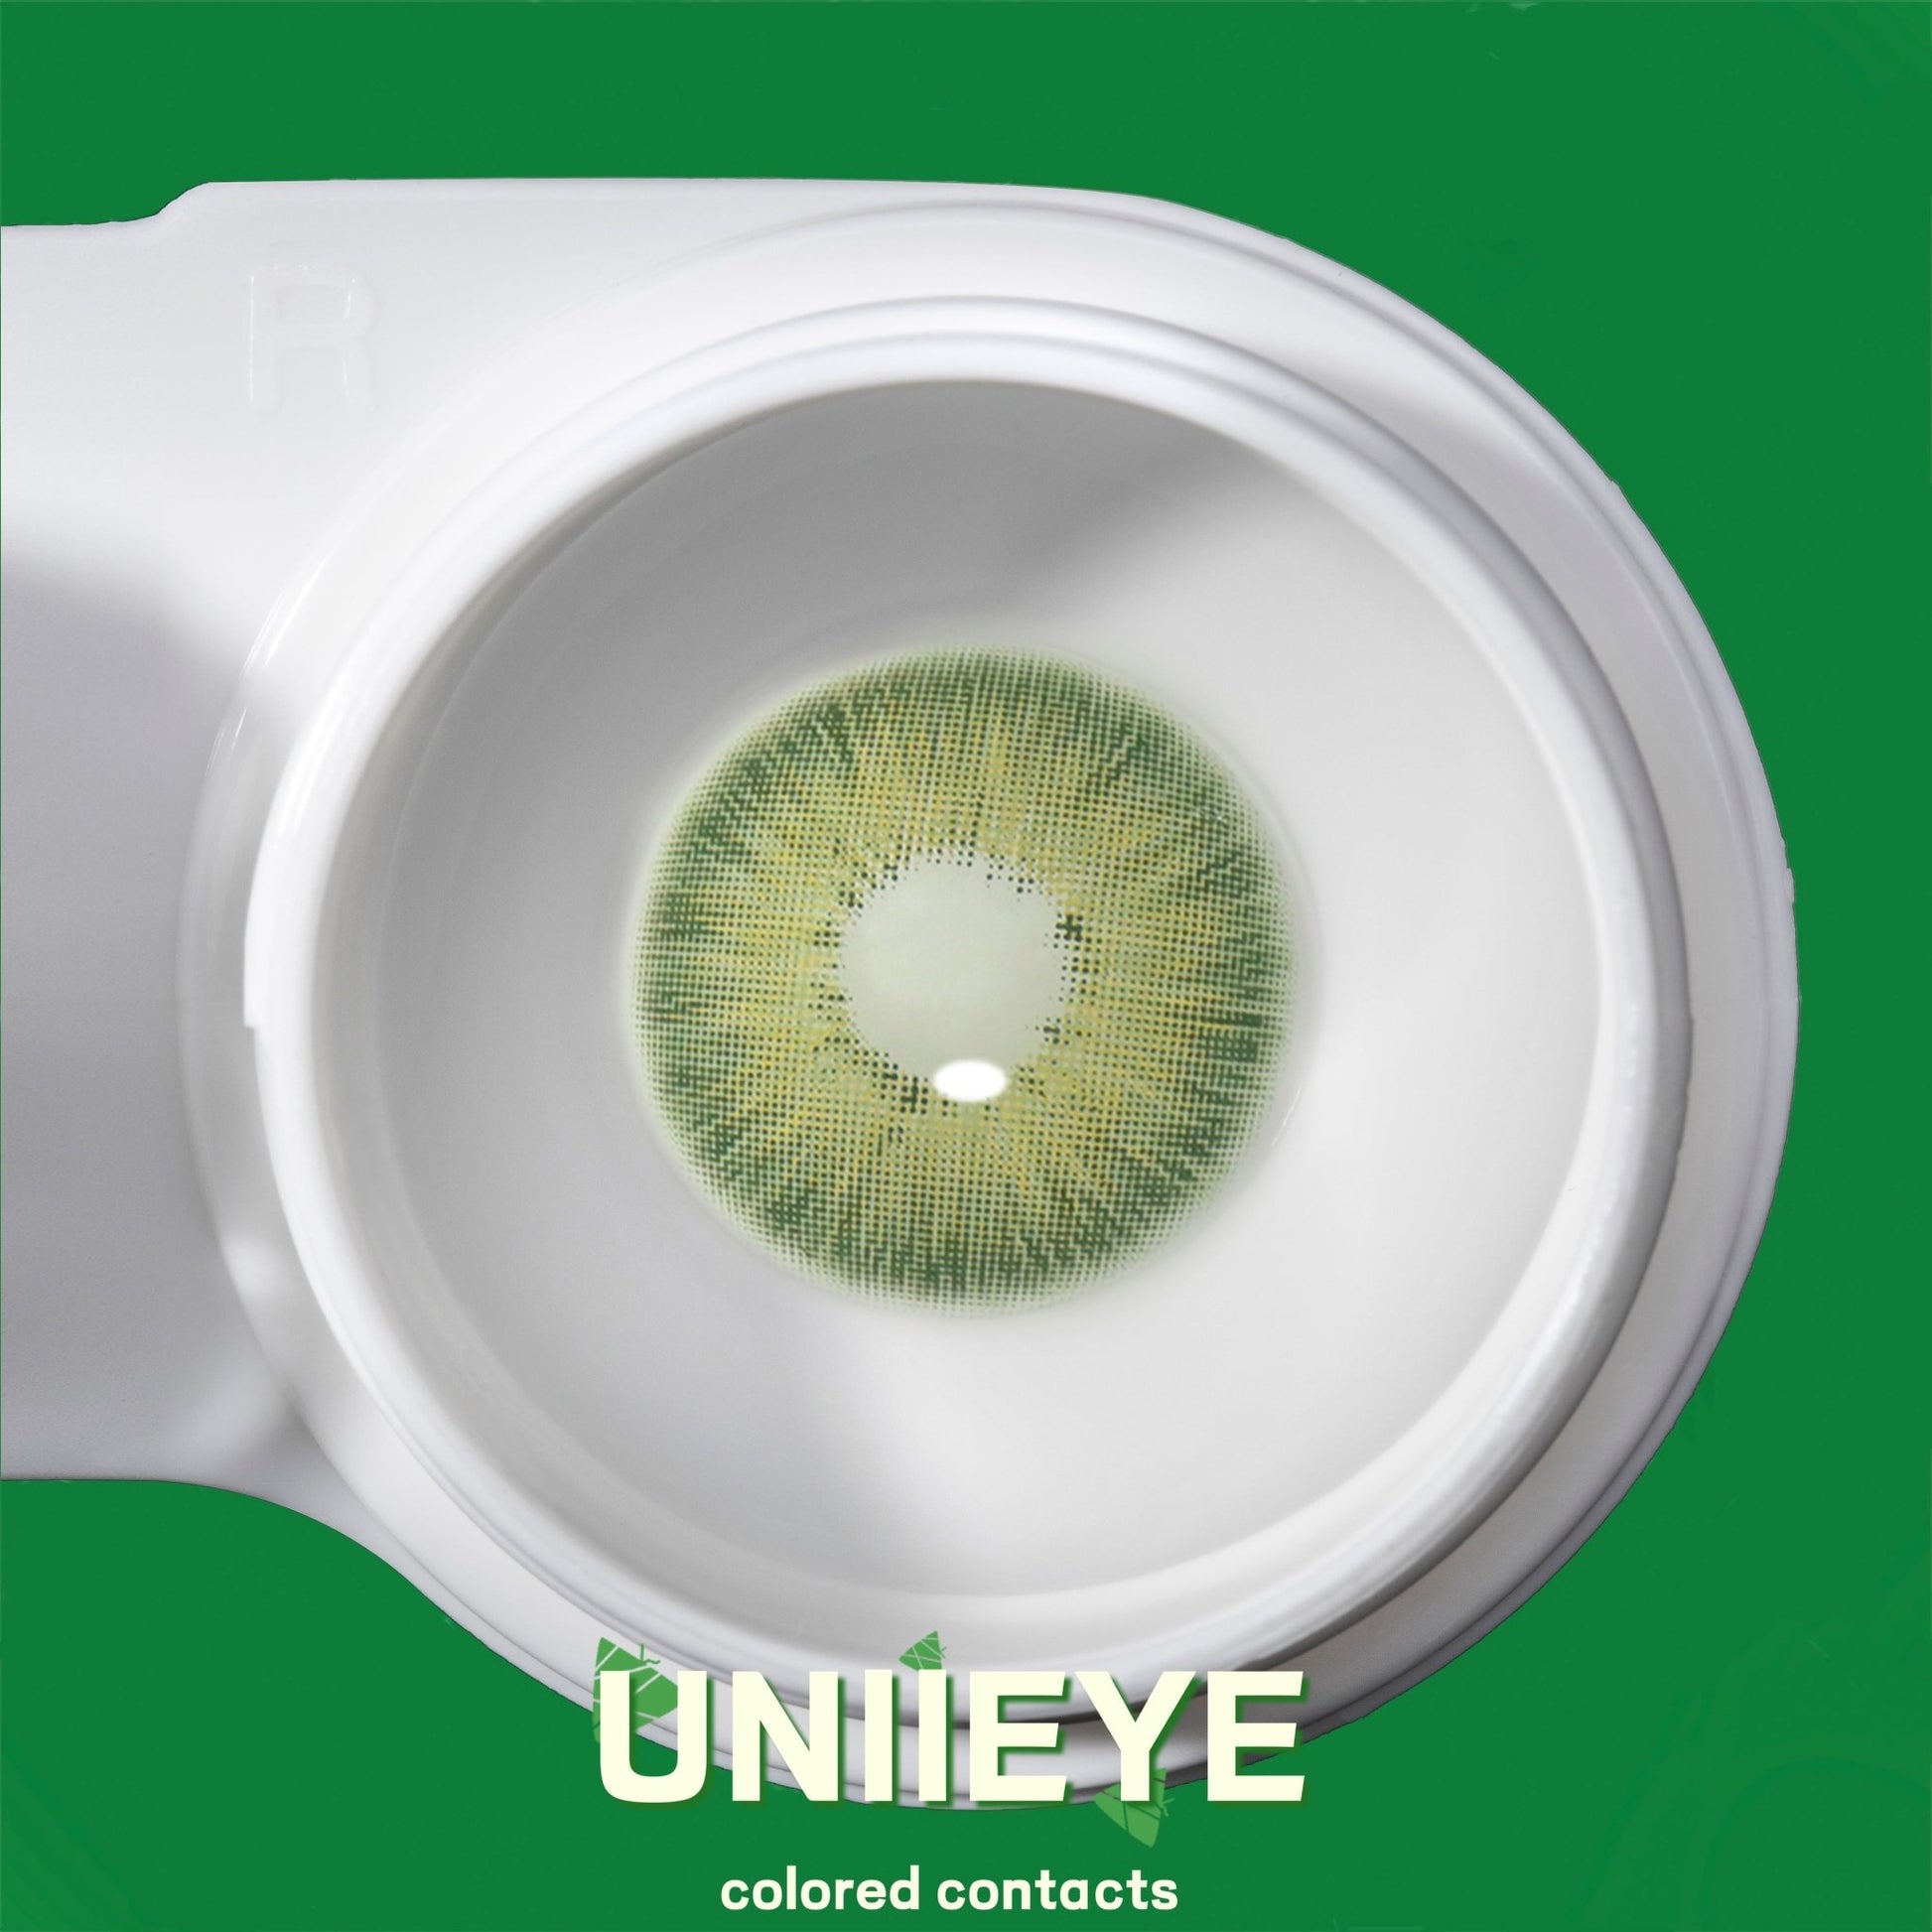 Colourfuleye Nature Series ia Green Colored Contacts